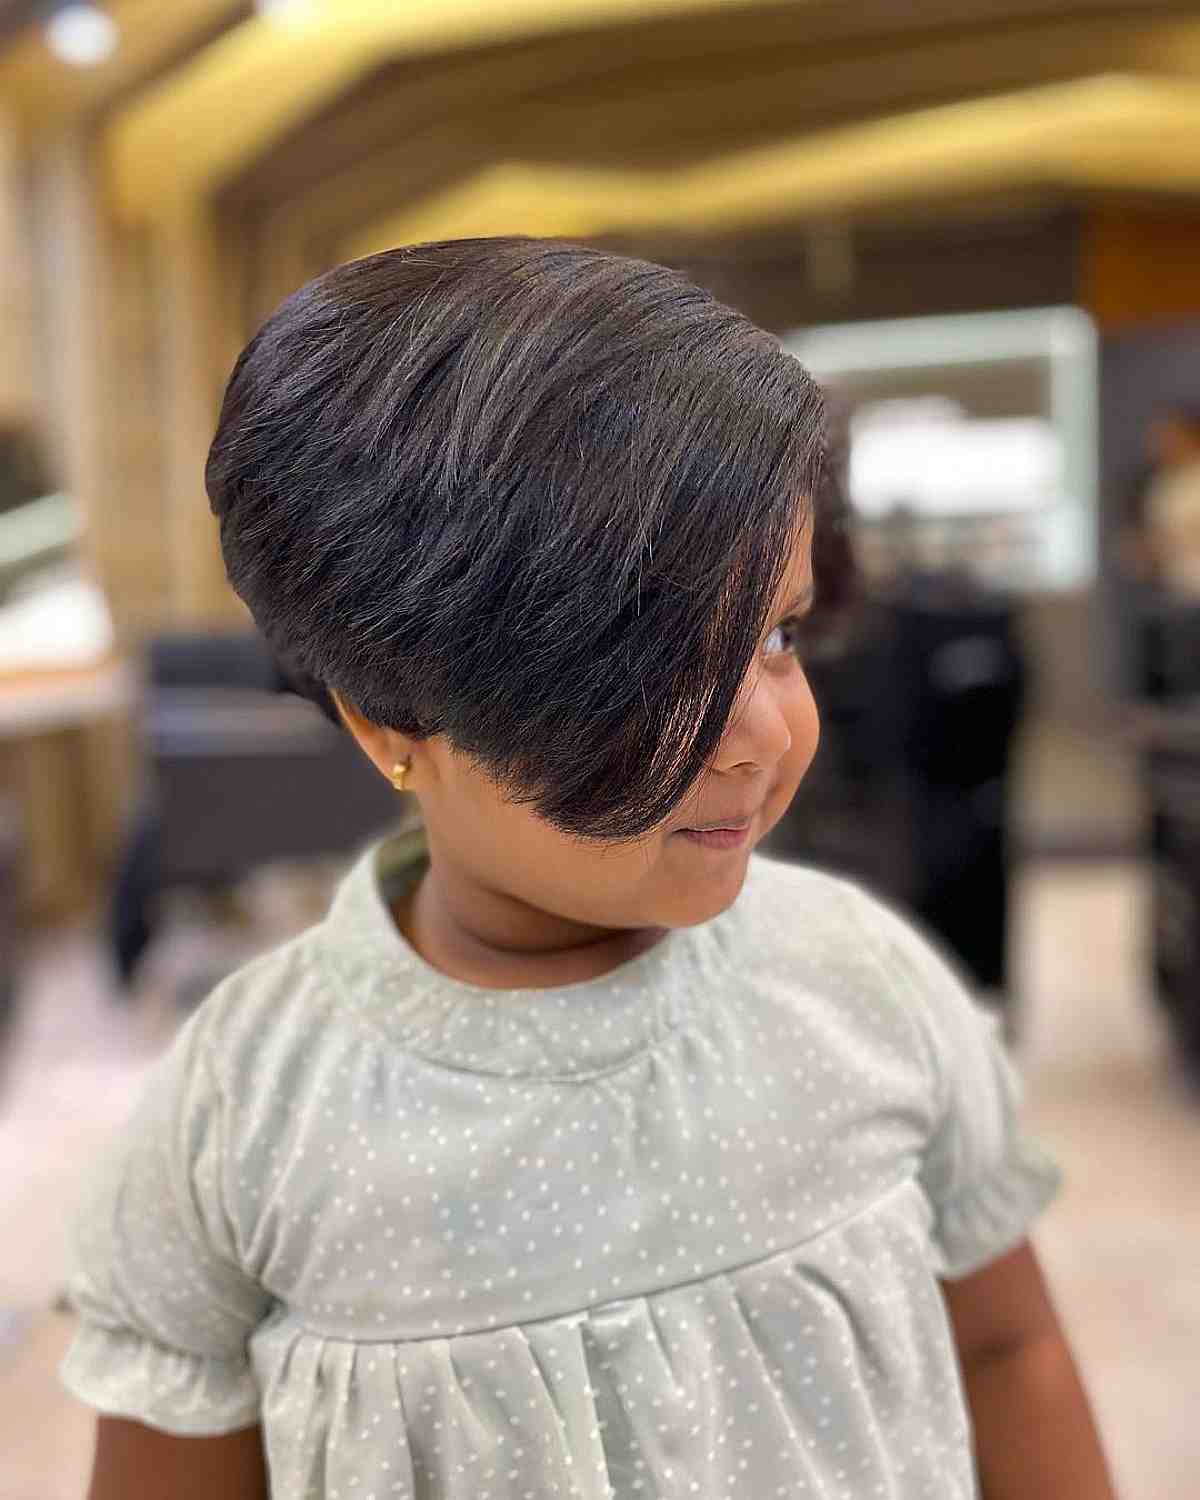 Details more than 84 girl short hair cut style latest